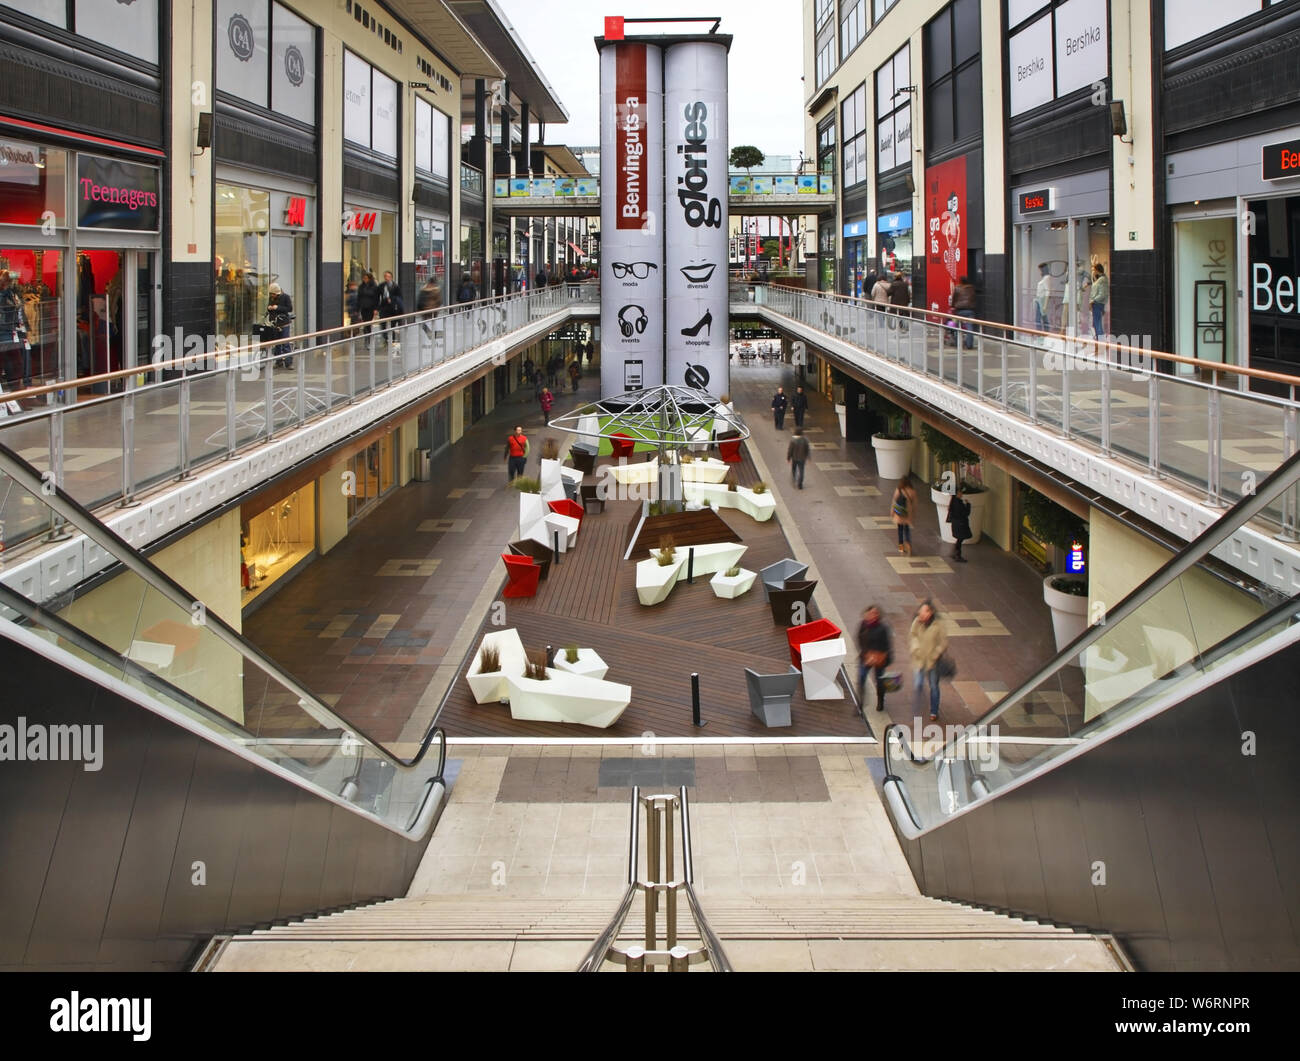 Shopping center on Placa de les Glories Catalanes in Barcelona. Spain Stock  Photo - Alamy